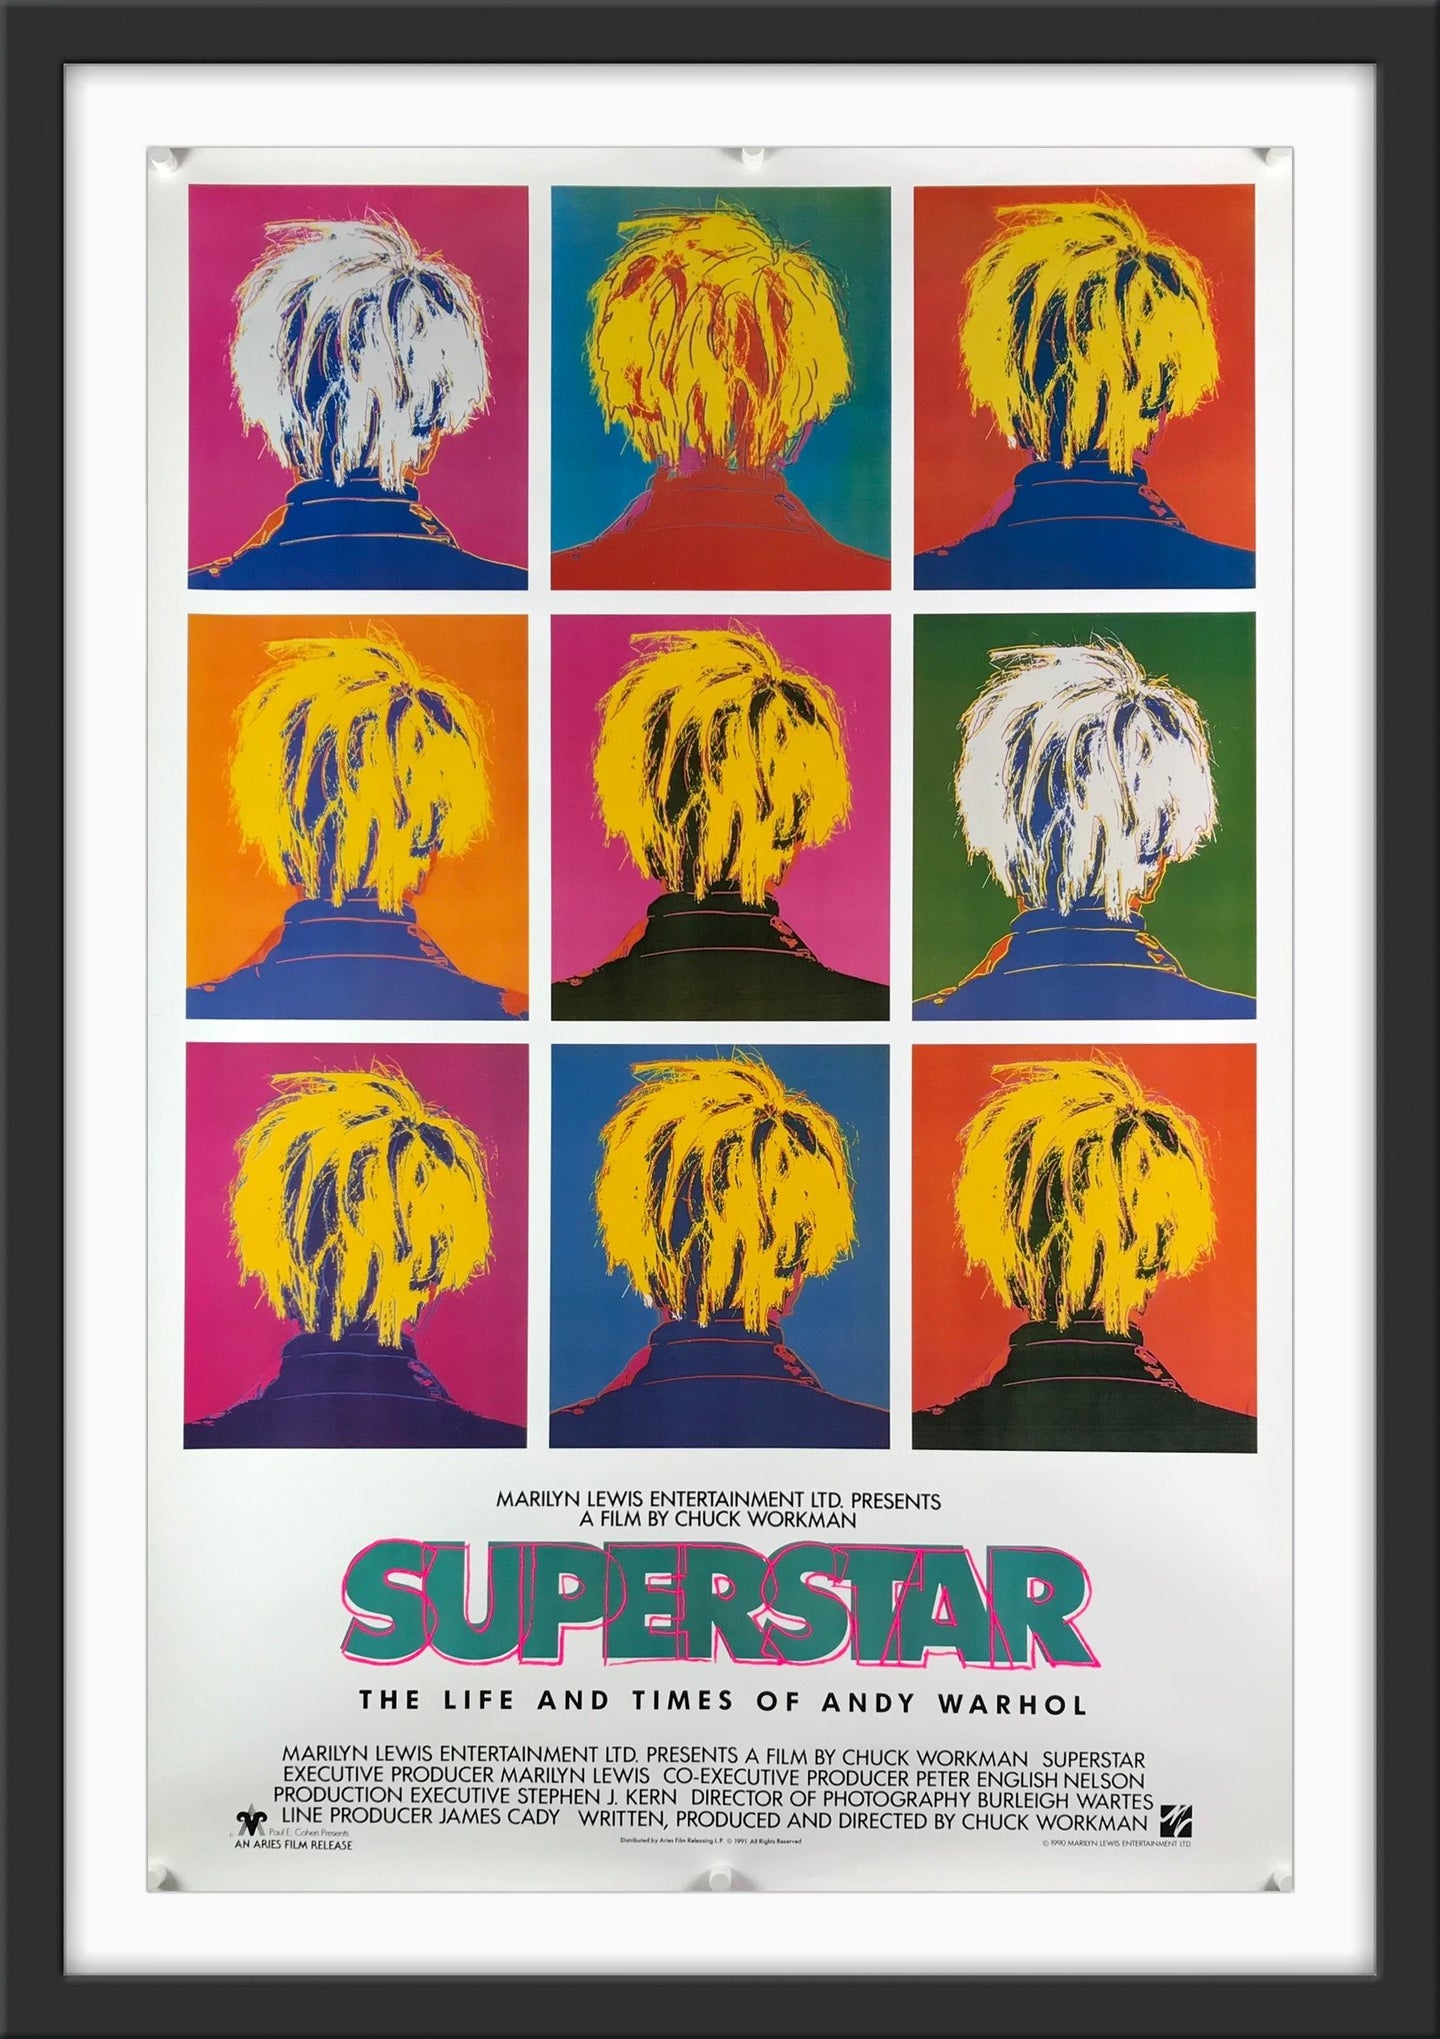 An original movie poster for the film Superstar: The Life and Times of Andy Warhol